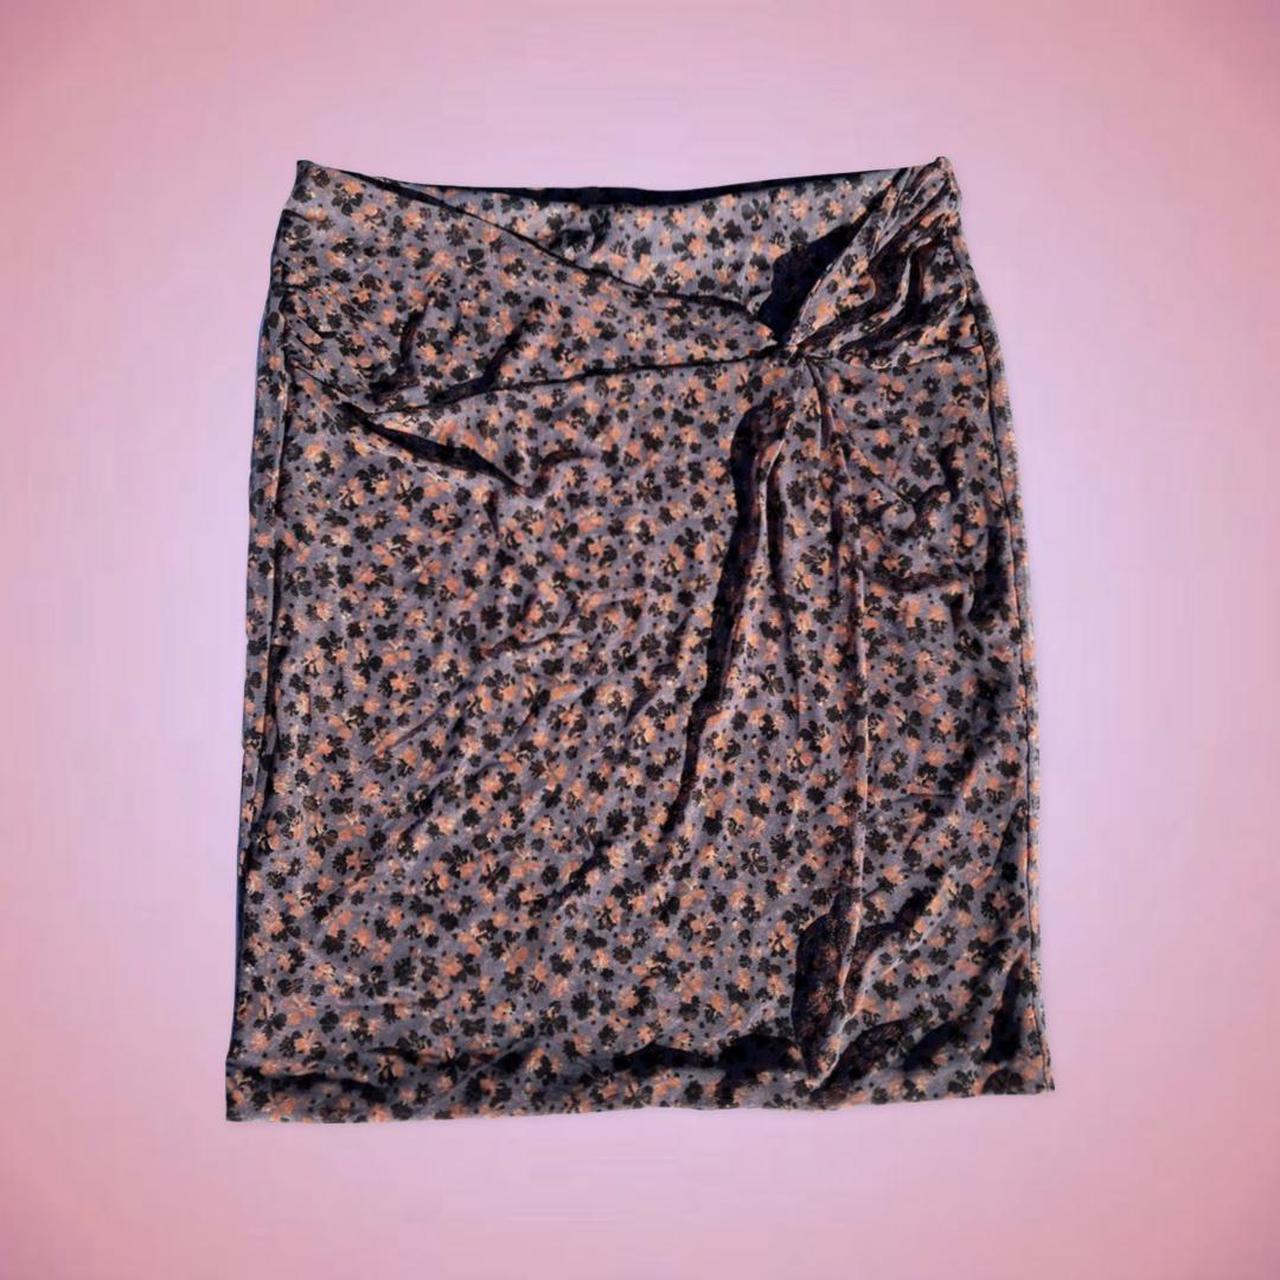 Product Image 1 - retro early 2000s floral skirt